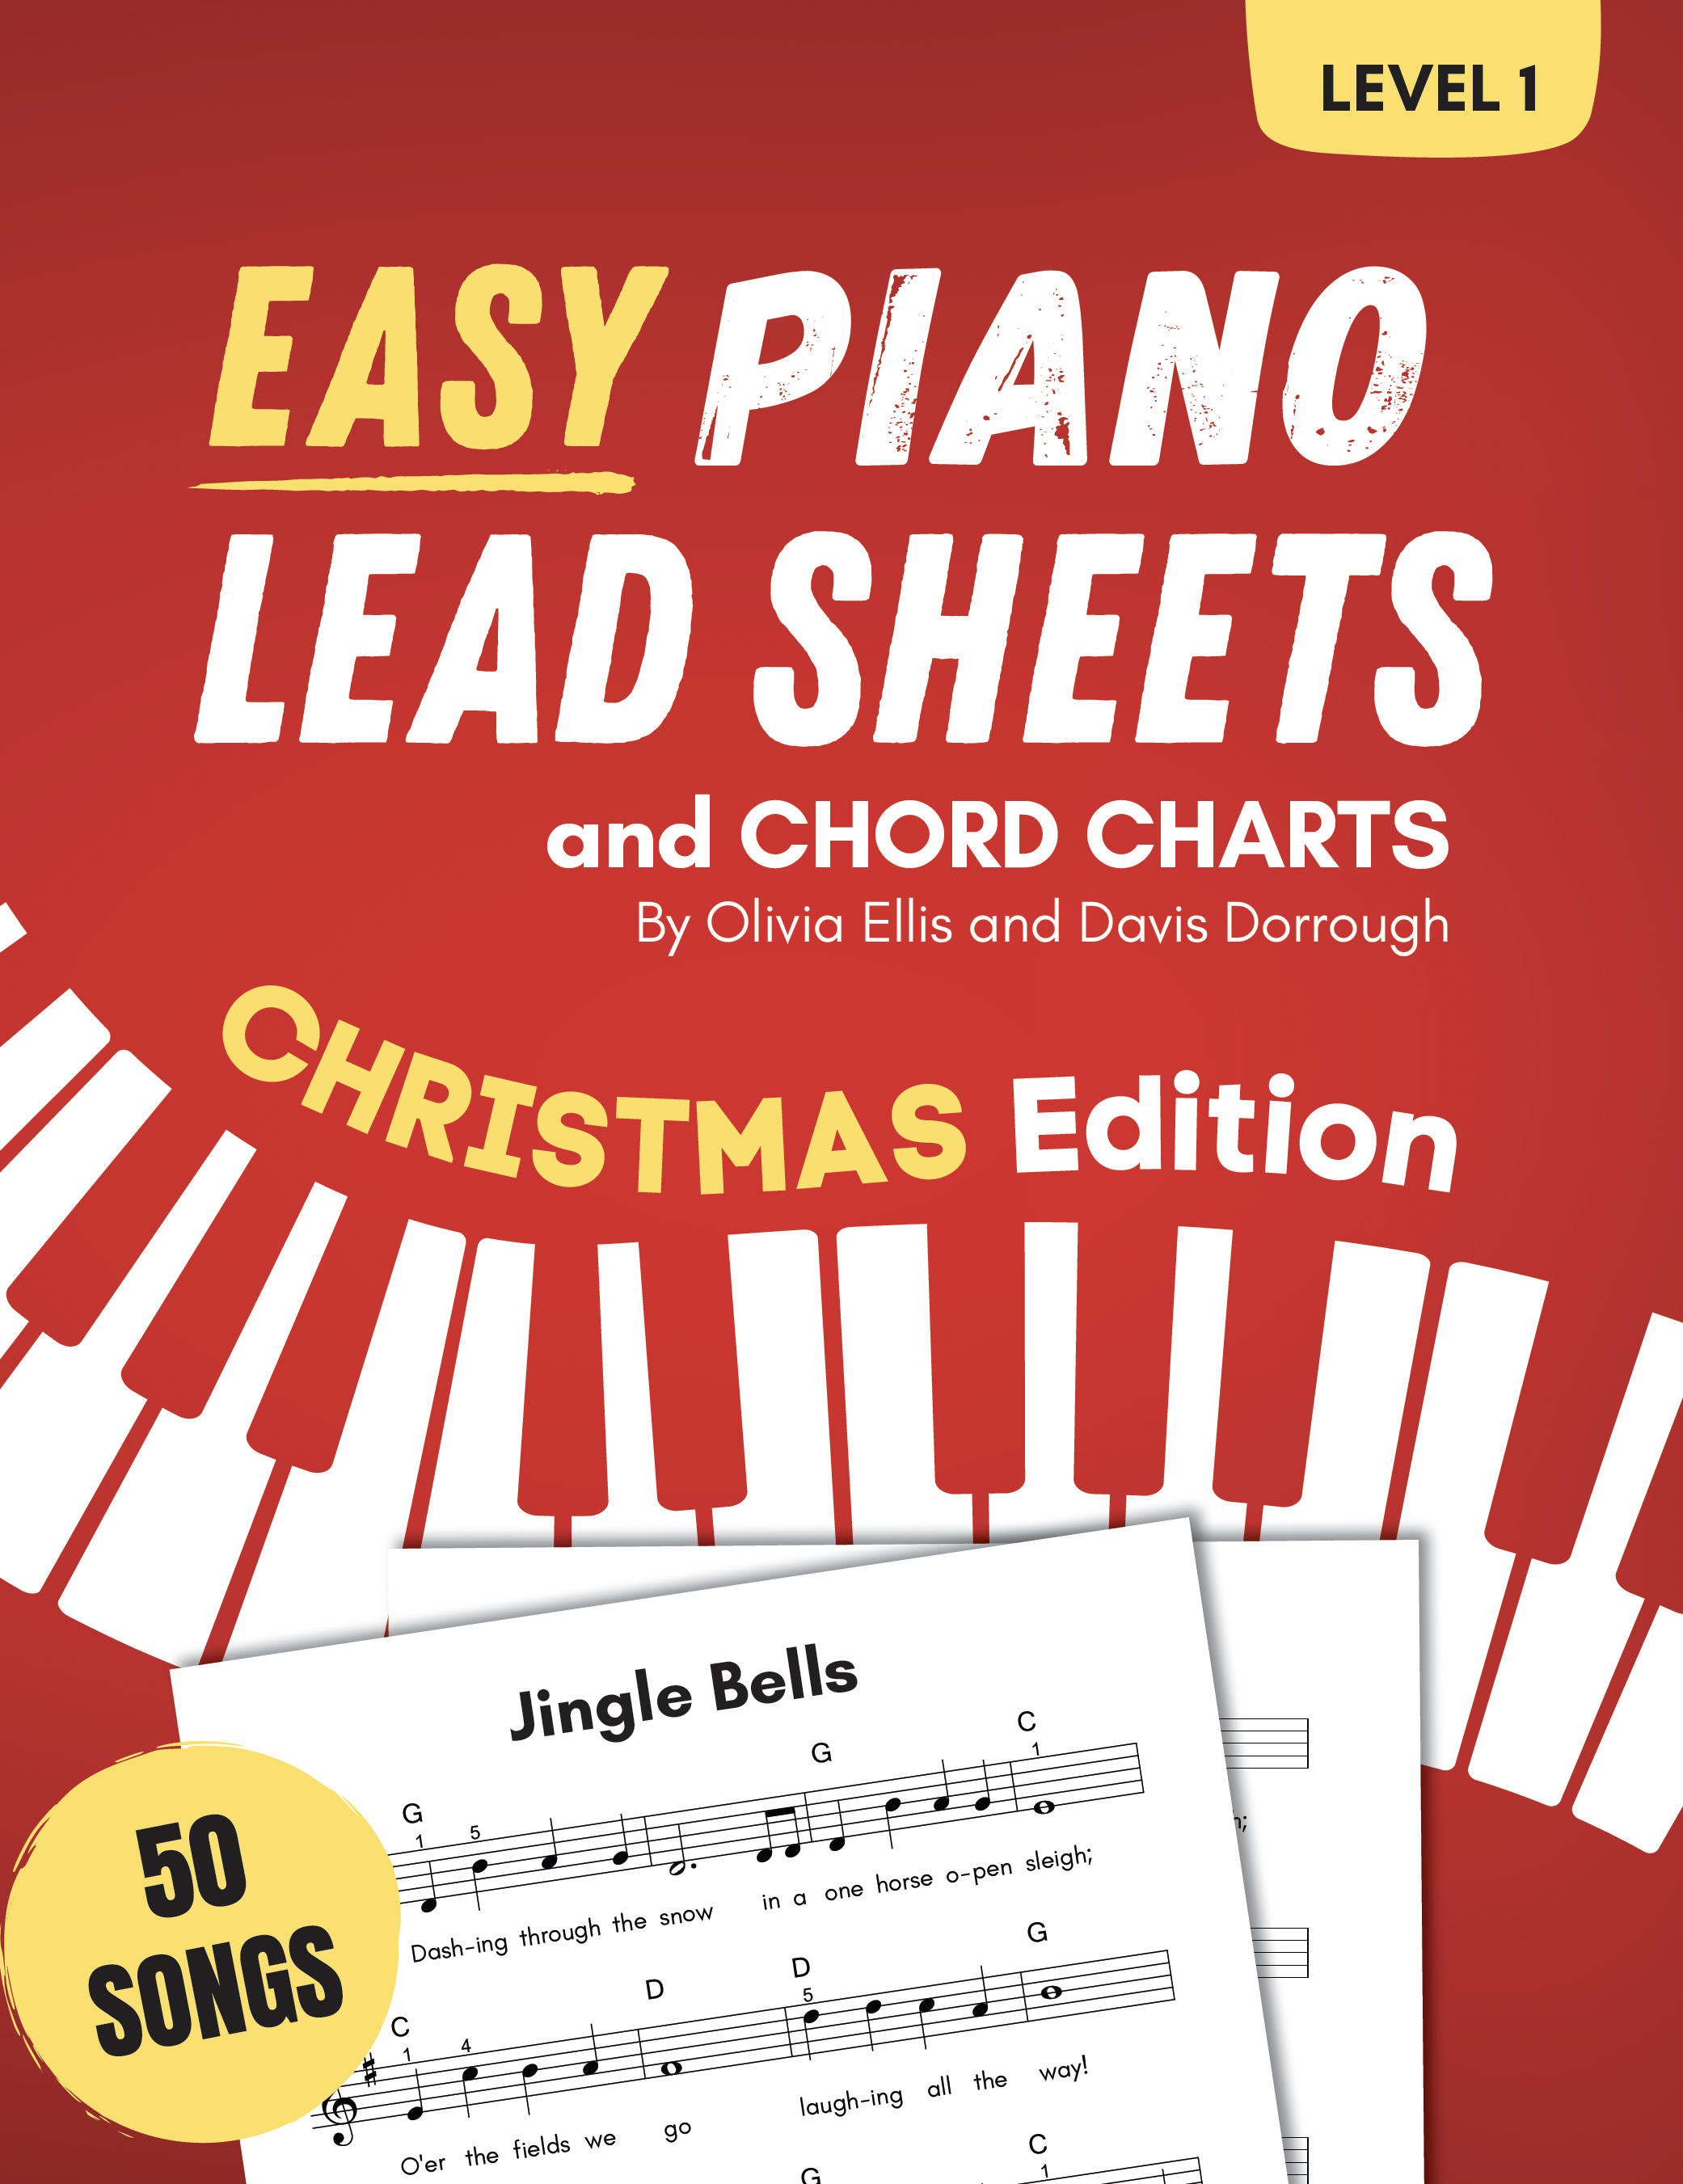 Easy Piano Lead Sheets and Chord Charts Book Cover